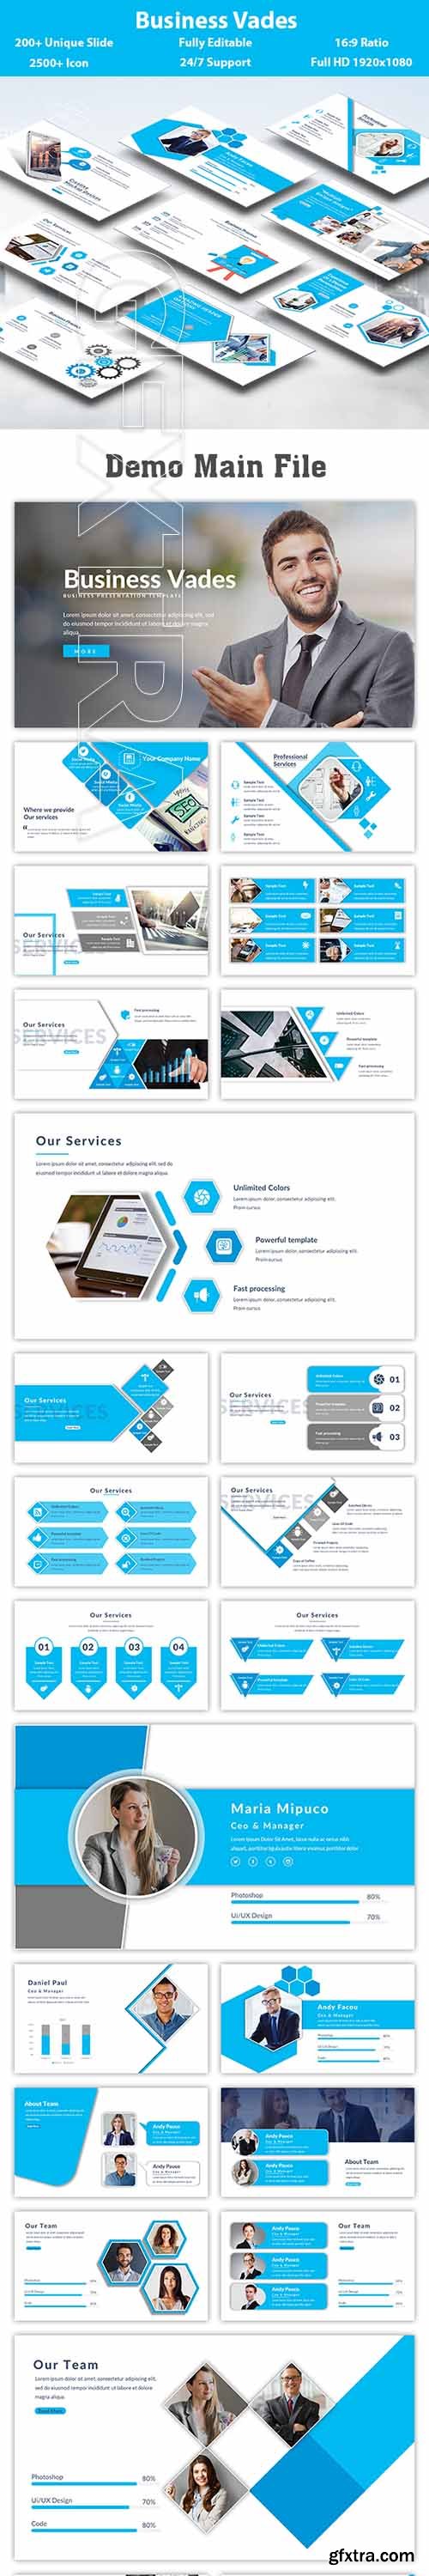 GraphicRiver - Business Vades Keynote Template 22388373